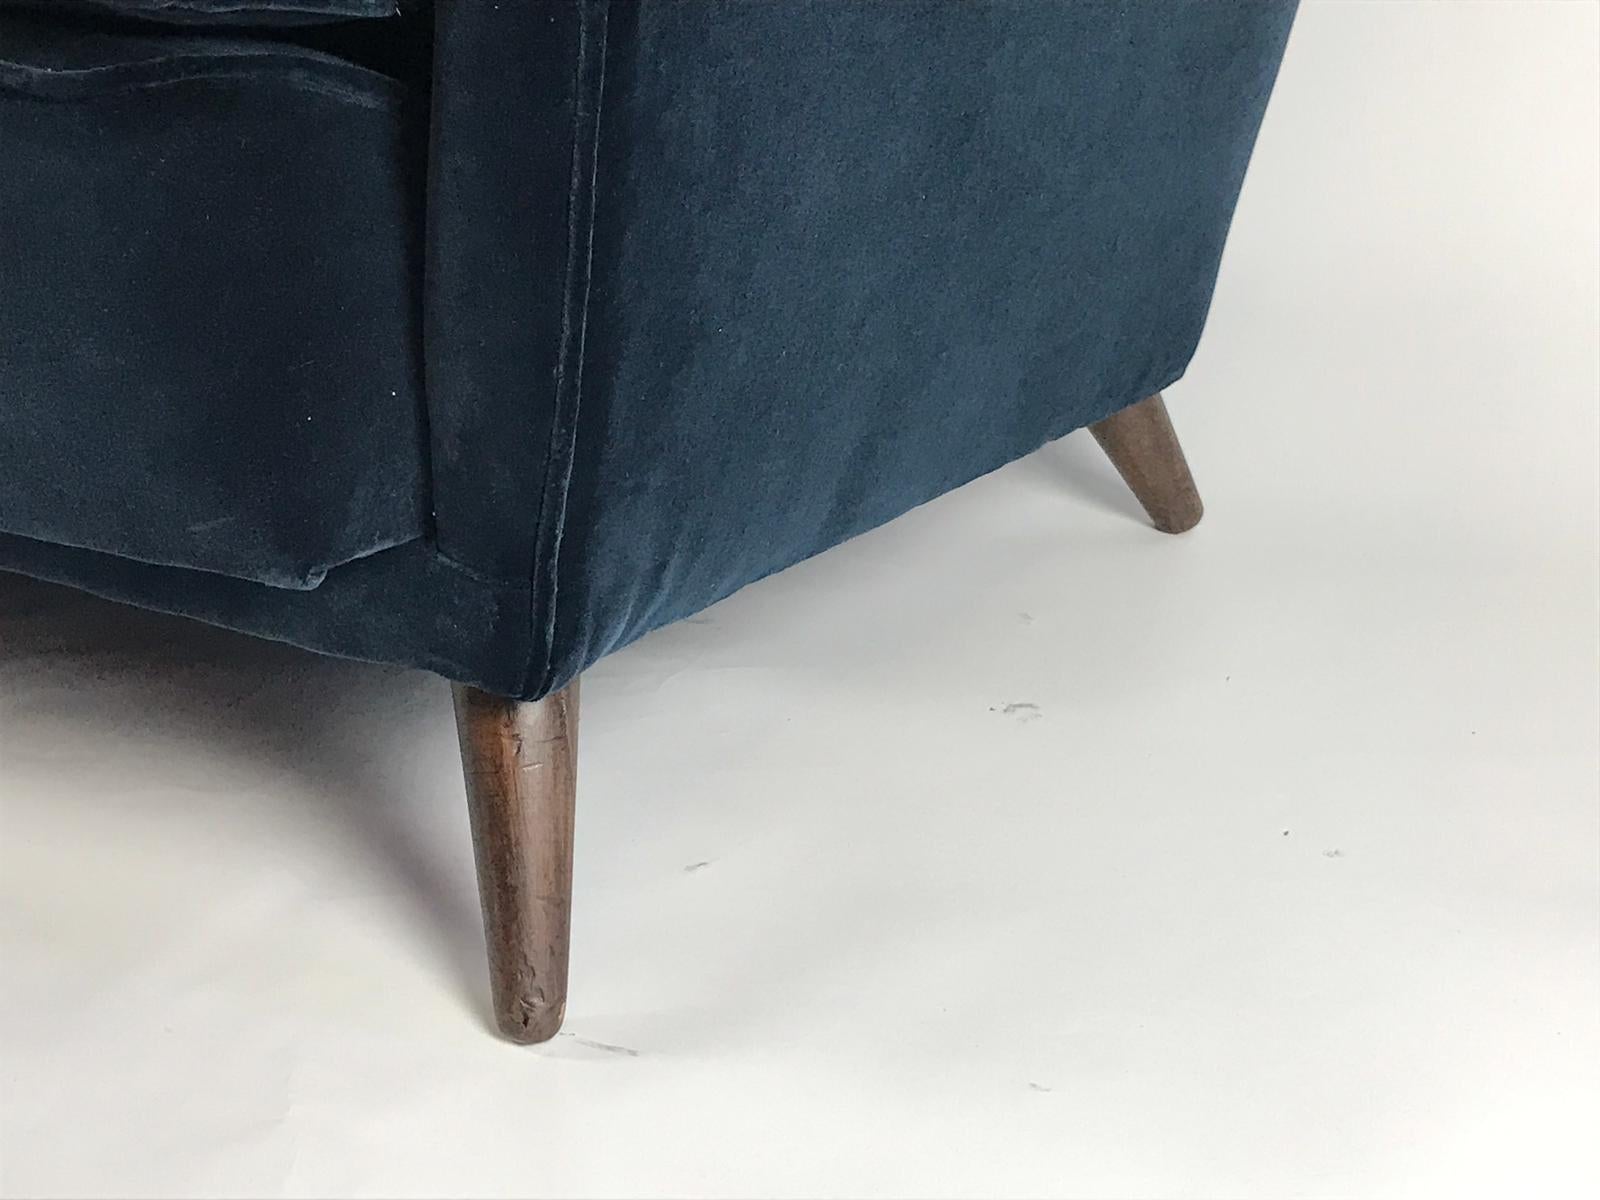 A fabulous and elegant 3-seat winged back sofa designed by Gio Ponti newly upholstered in navy velvet. The sofa is designed with beautiful lines with indented sides and a buttoned back and is standing on its original walnut feet.